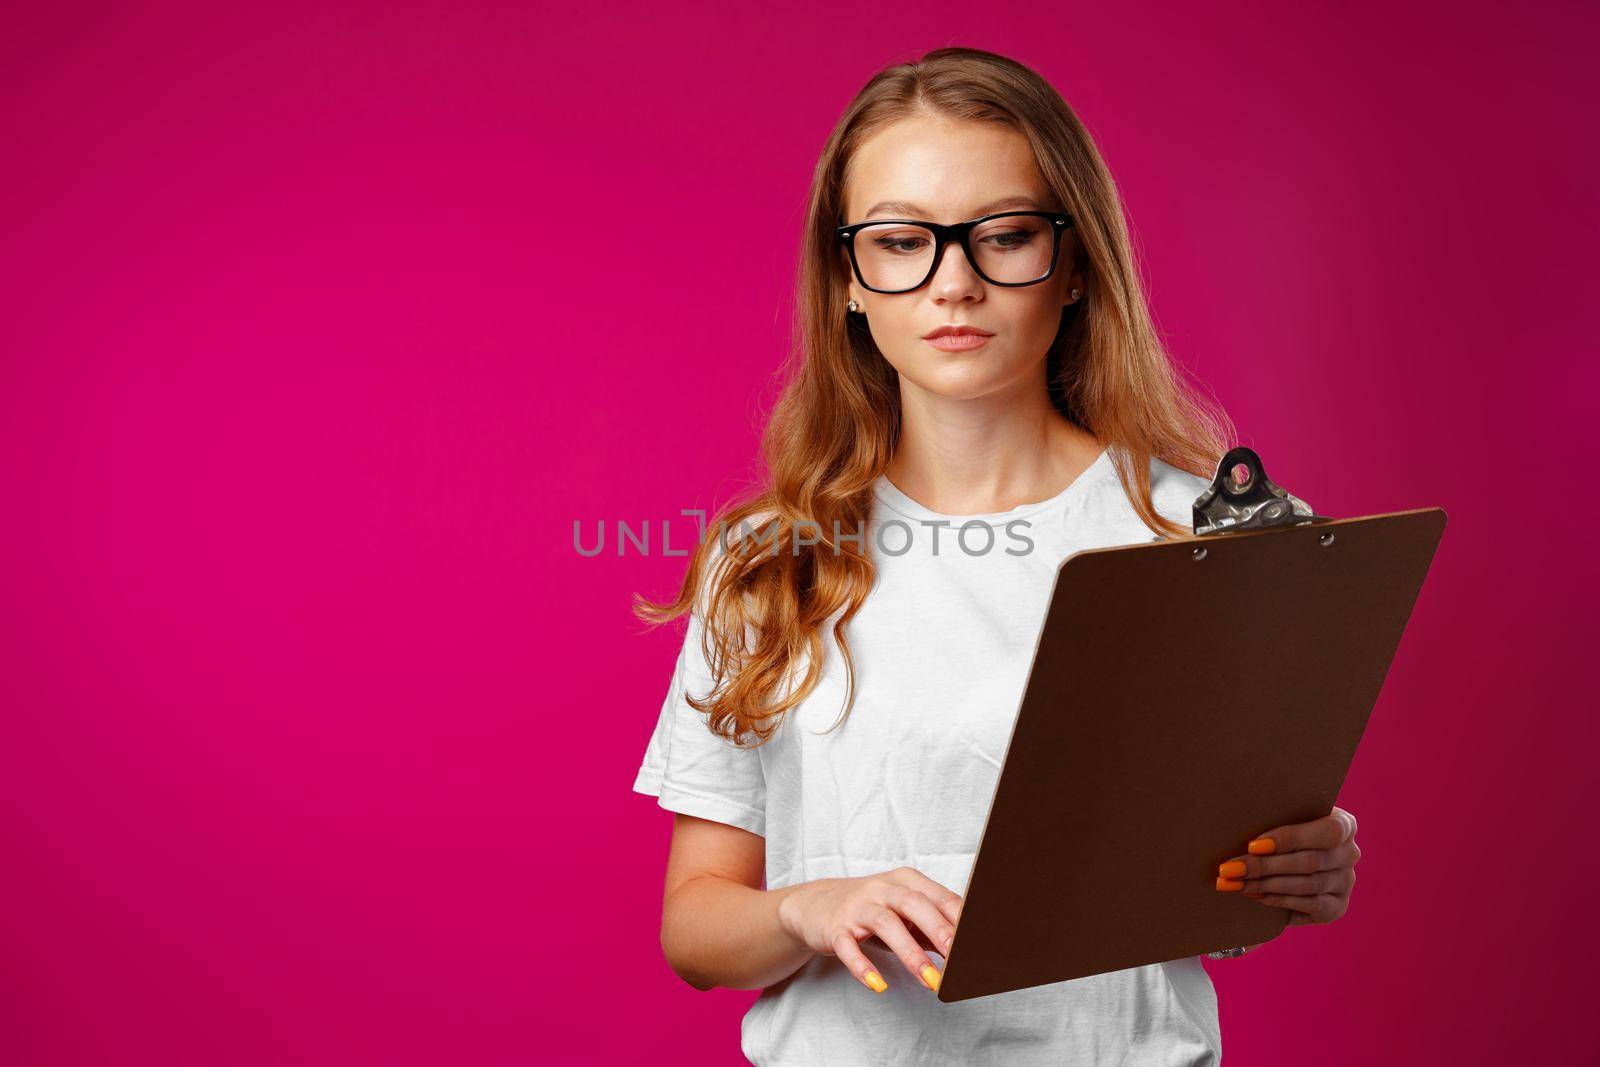 Young beautiful smiling woman standing and holding clipboard against pink background